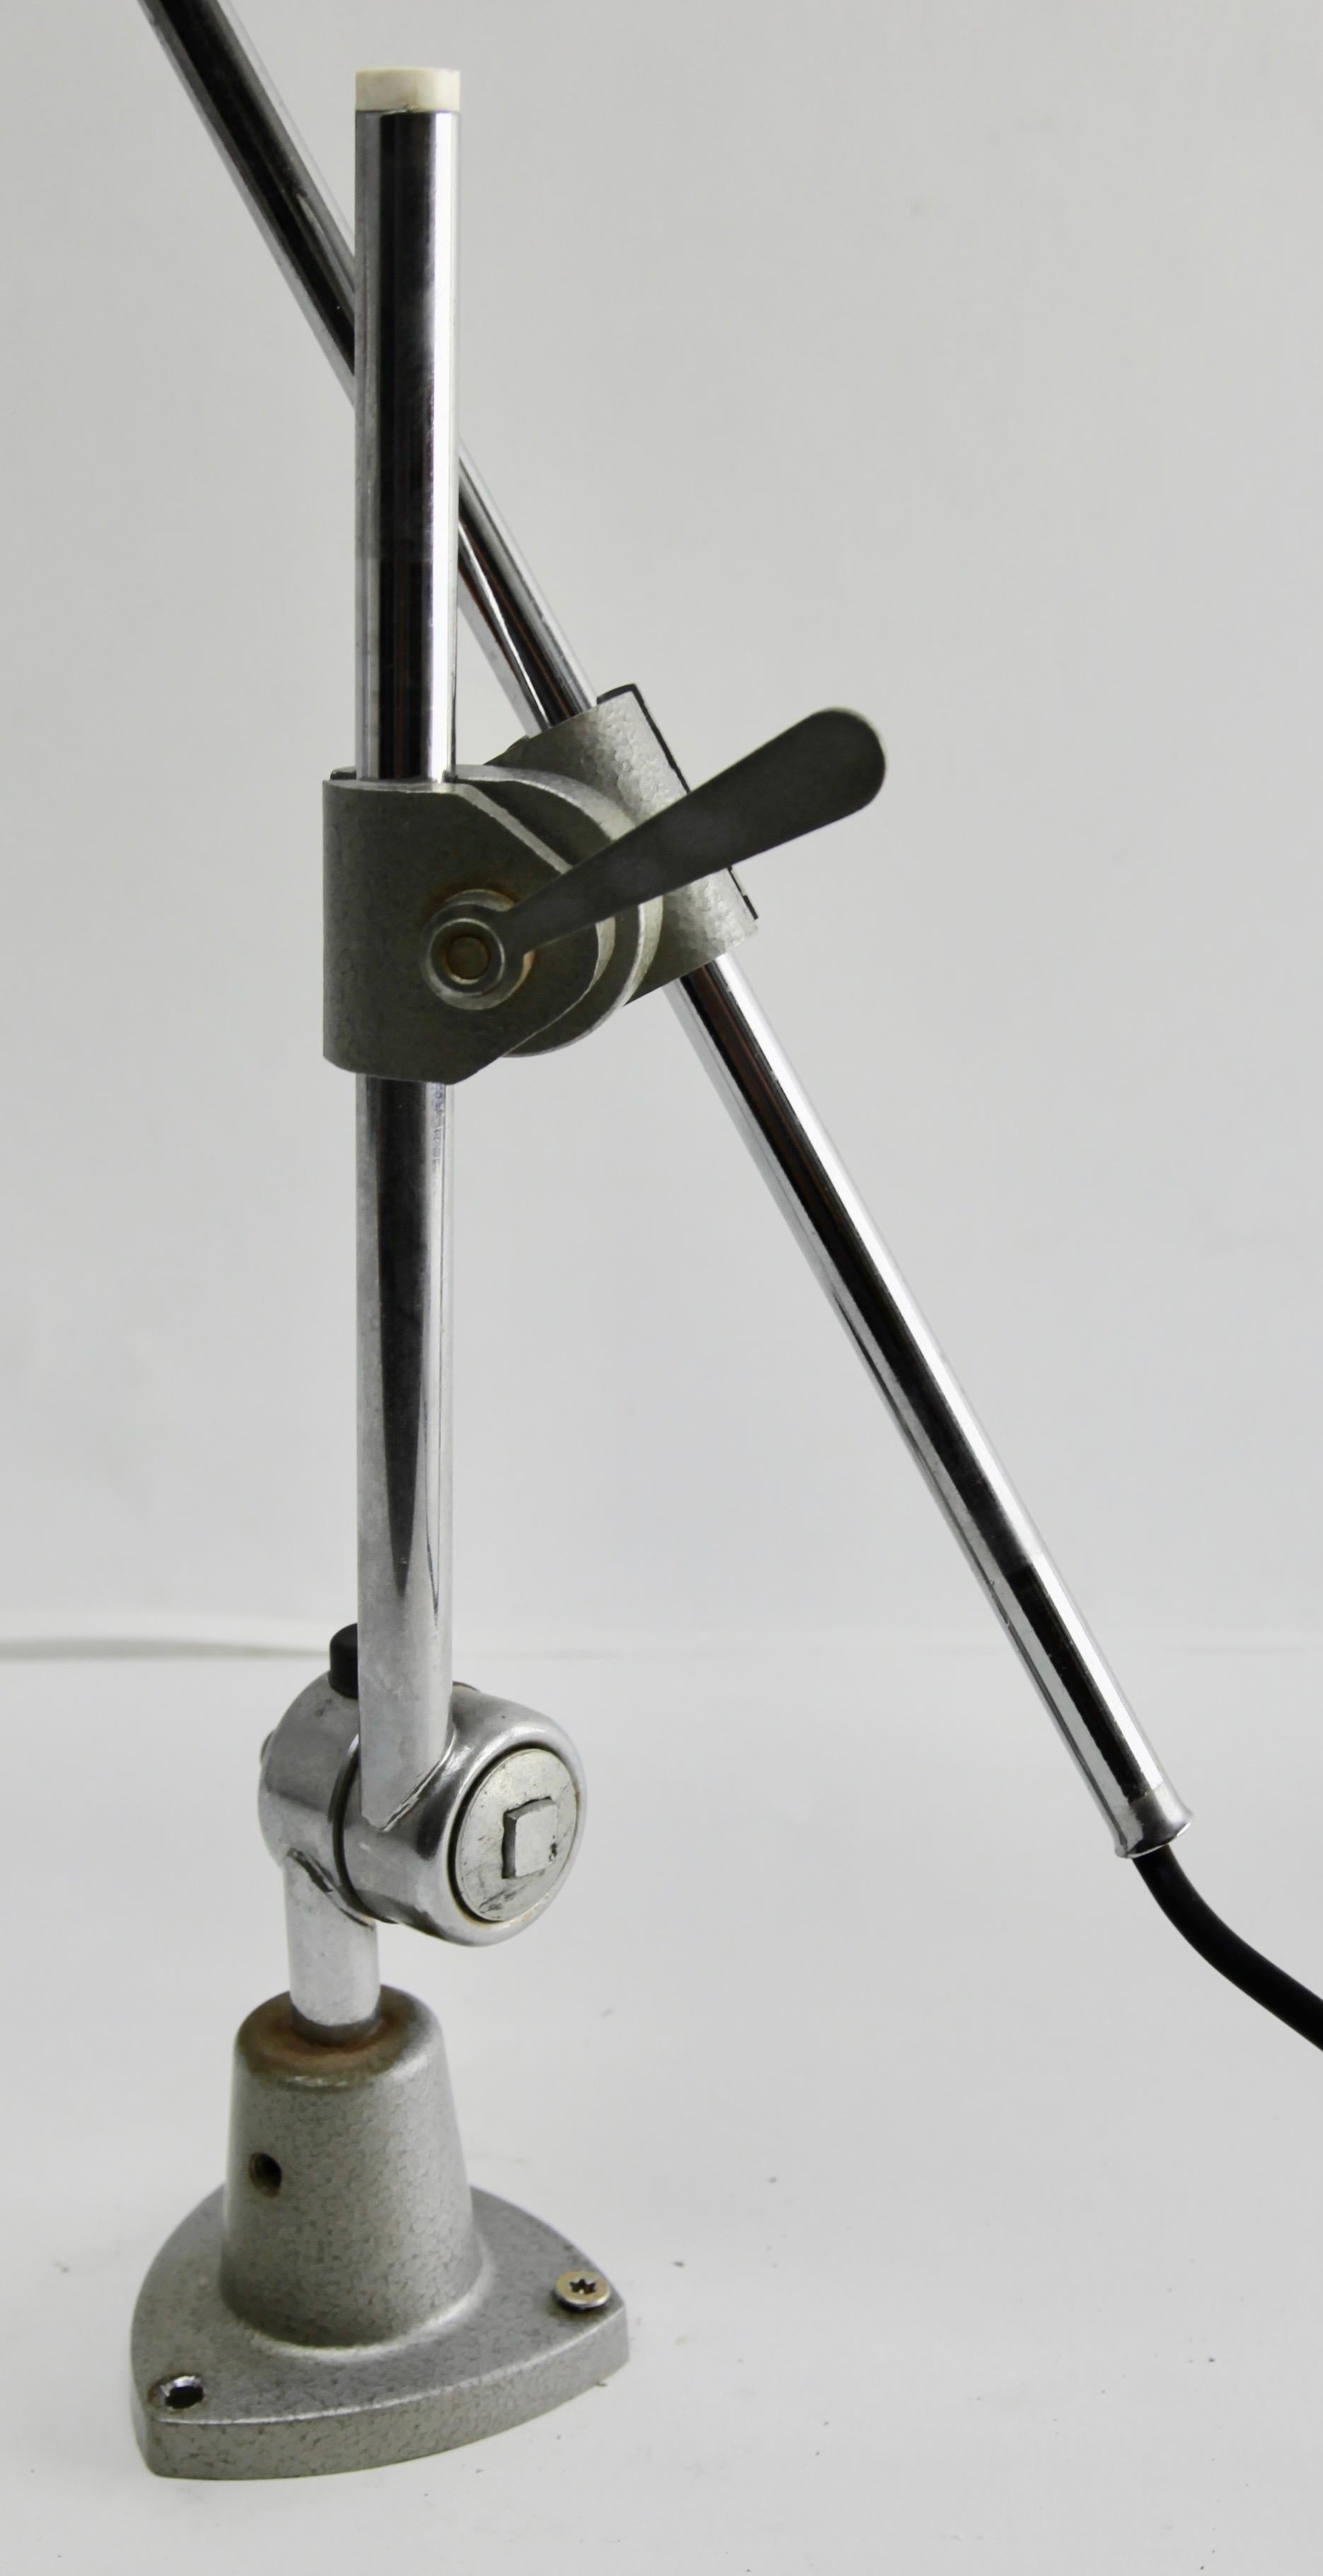 Machine-Made Industrial Anglepoise Lamp 'Silver-Grey' with Adjustable and Flexible Sections